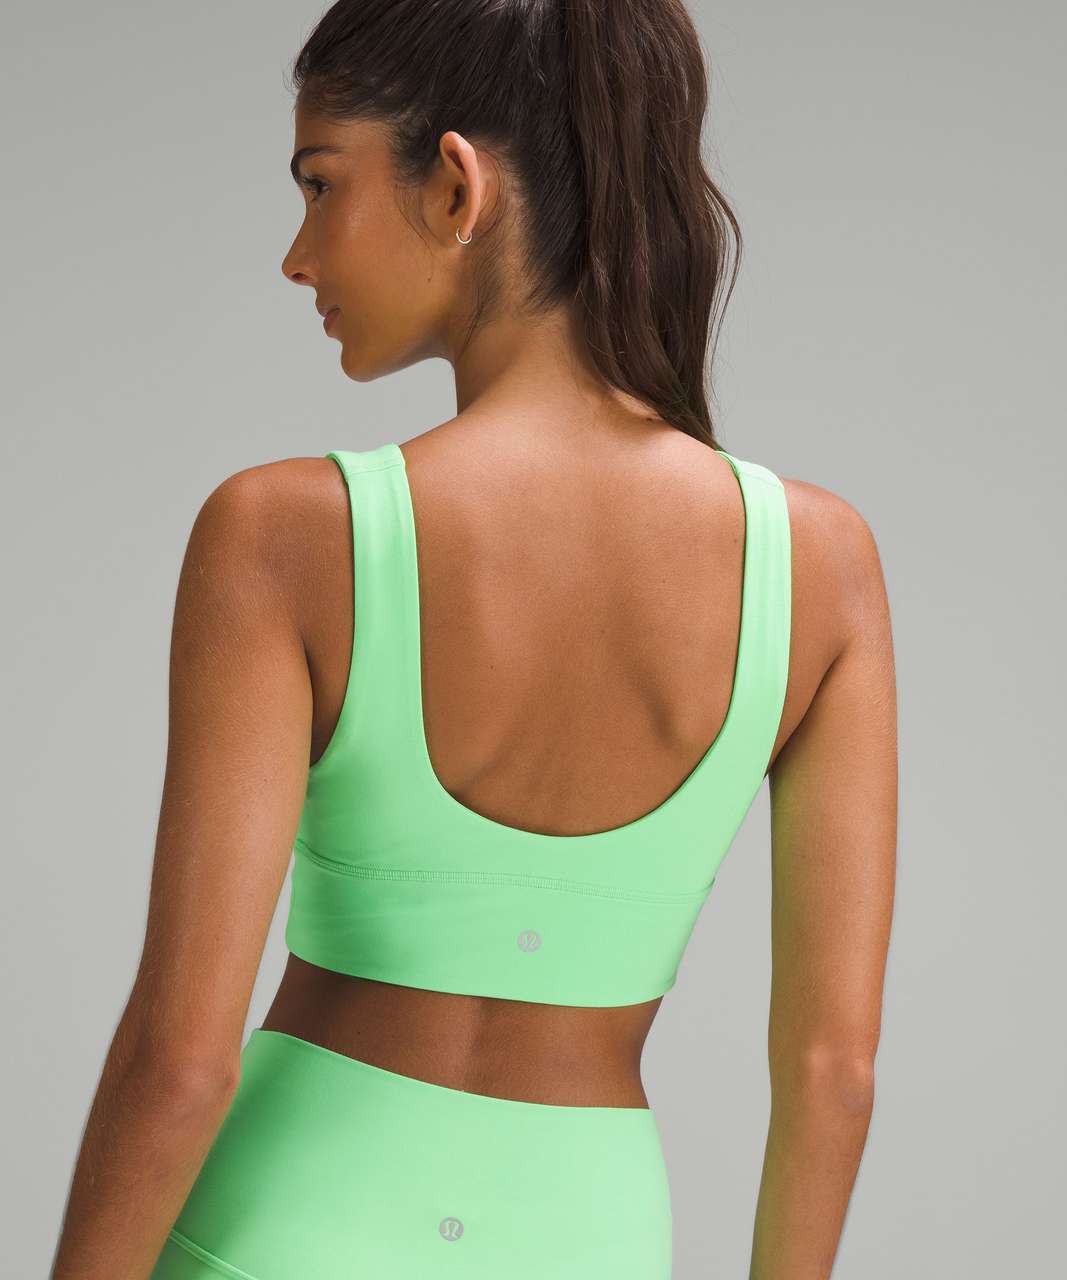 lululemon has THE top of #summer. Come and get it. The Align V-Neck B